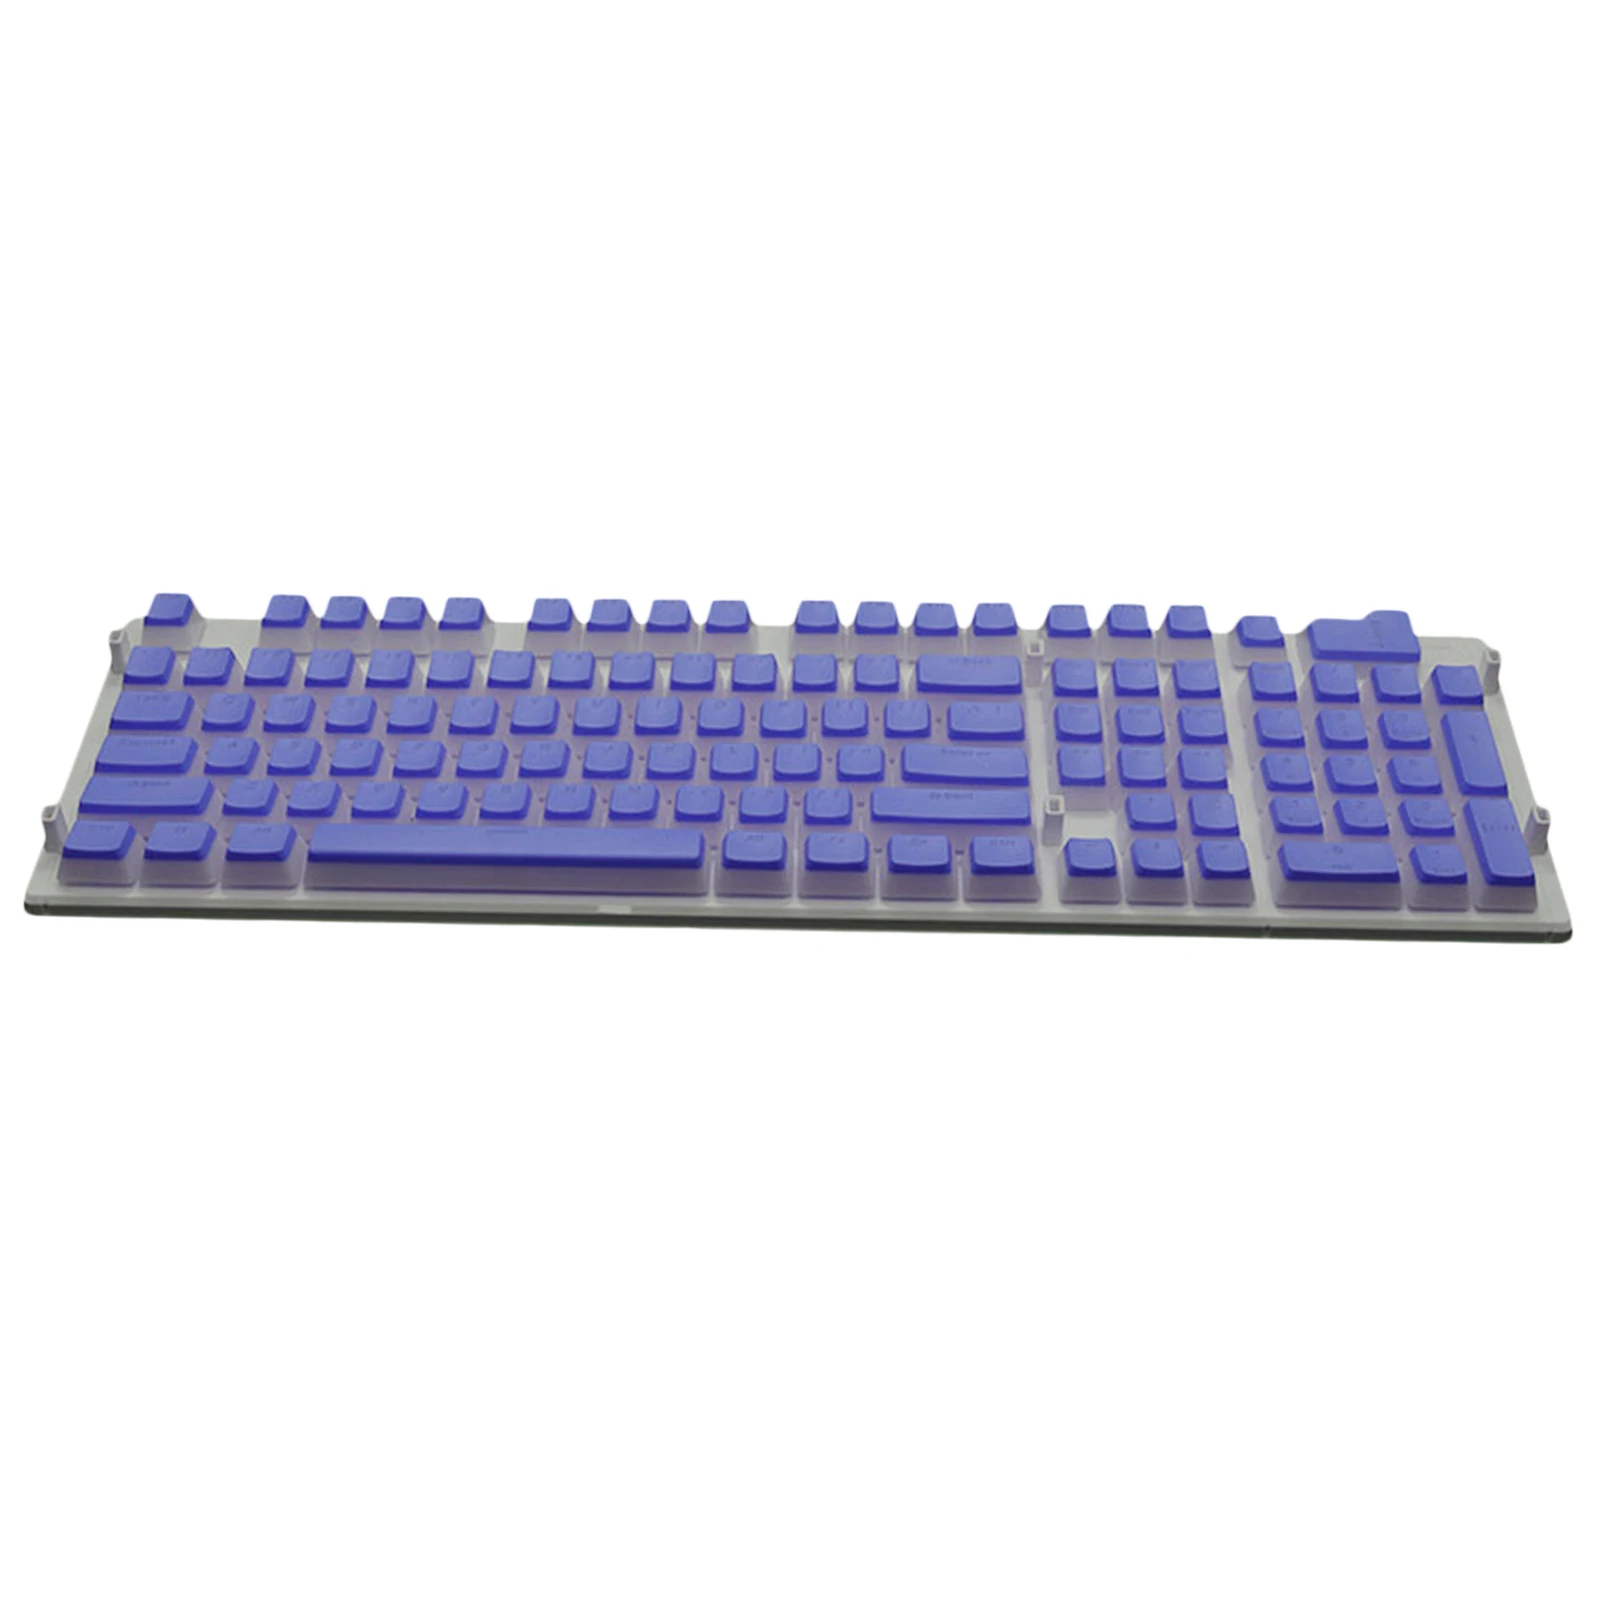 108 Keys Double Shot PBT Pudding Keycaps for Mechanical Gaming Keyboard, not